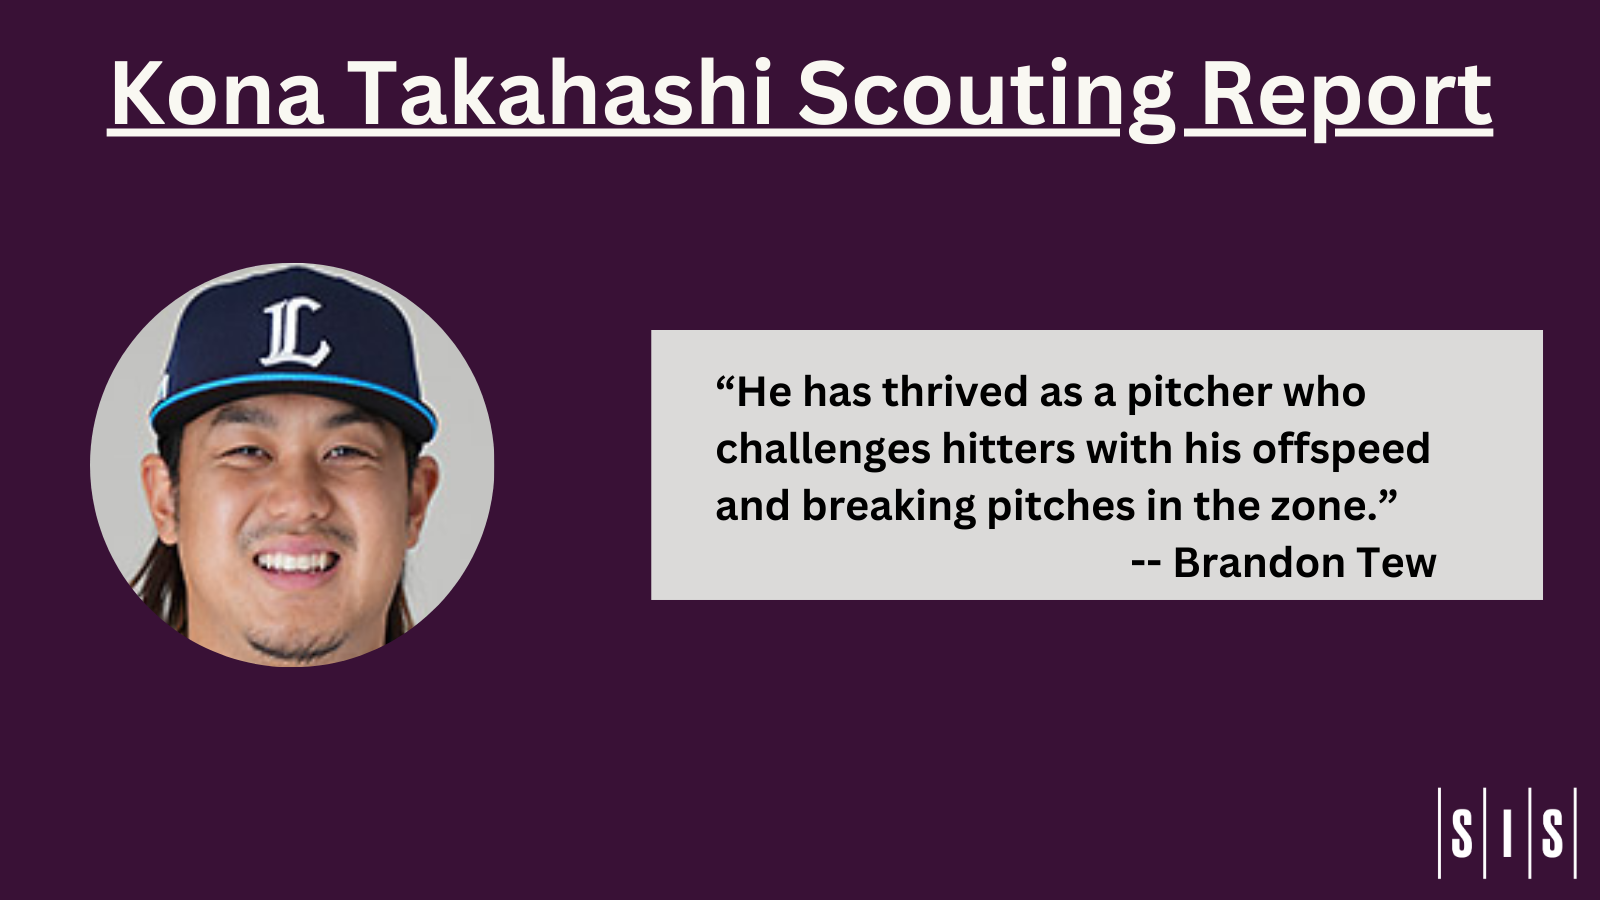 “He has thrived as a pitcher who challenges hitters with his offspeed and breaking pitches in the zone.” -- Brandon Tew on Kona Takahashi